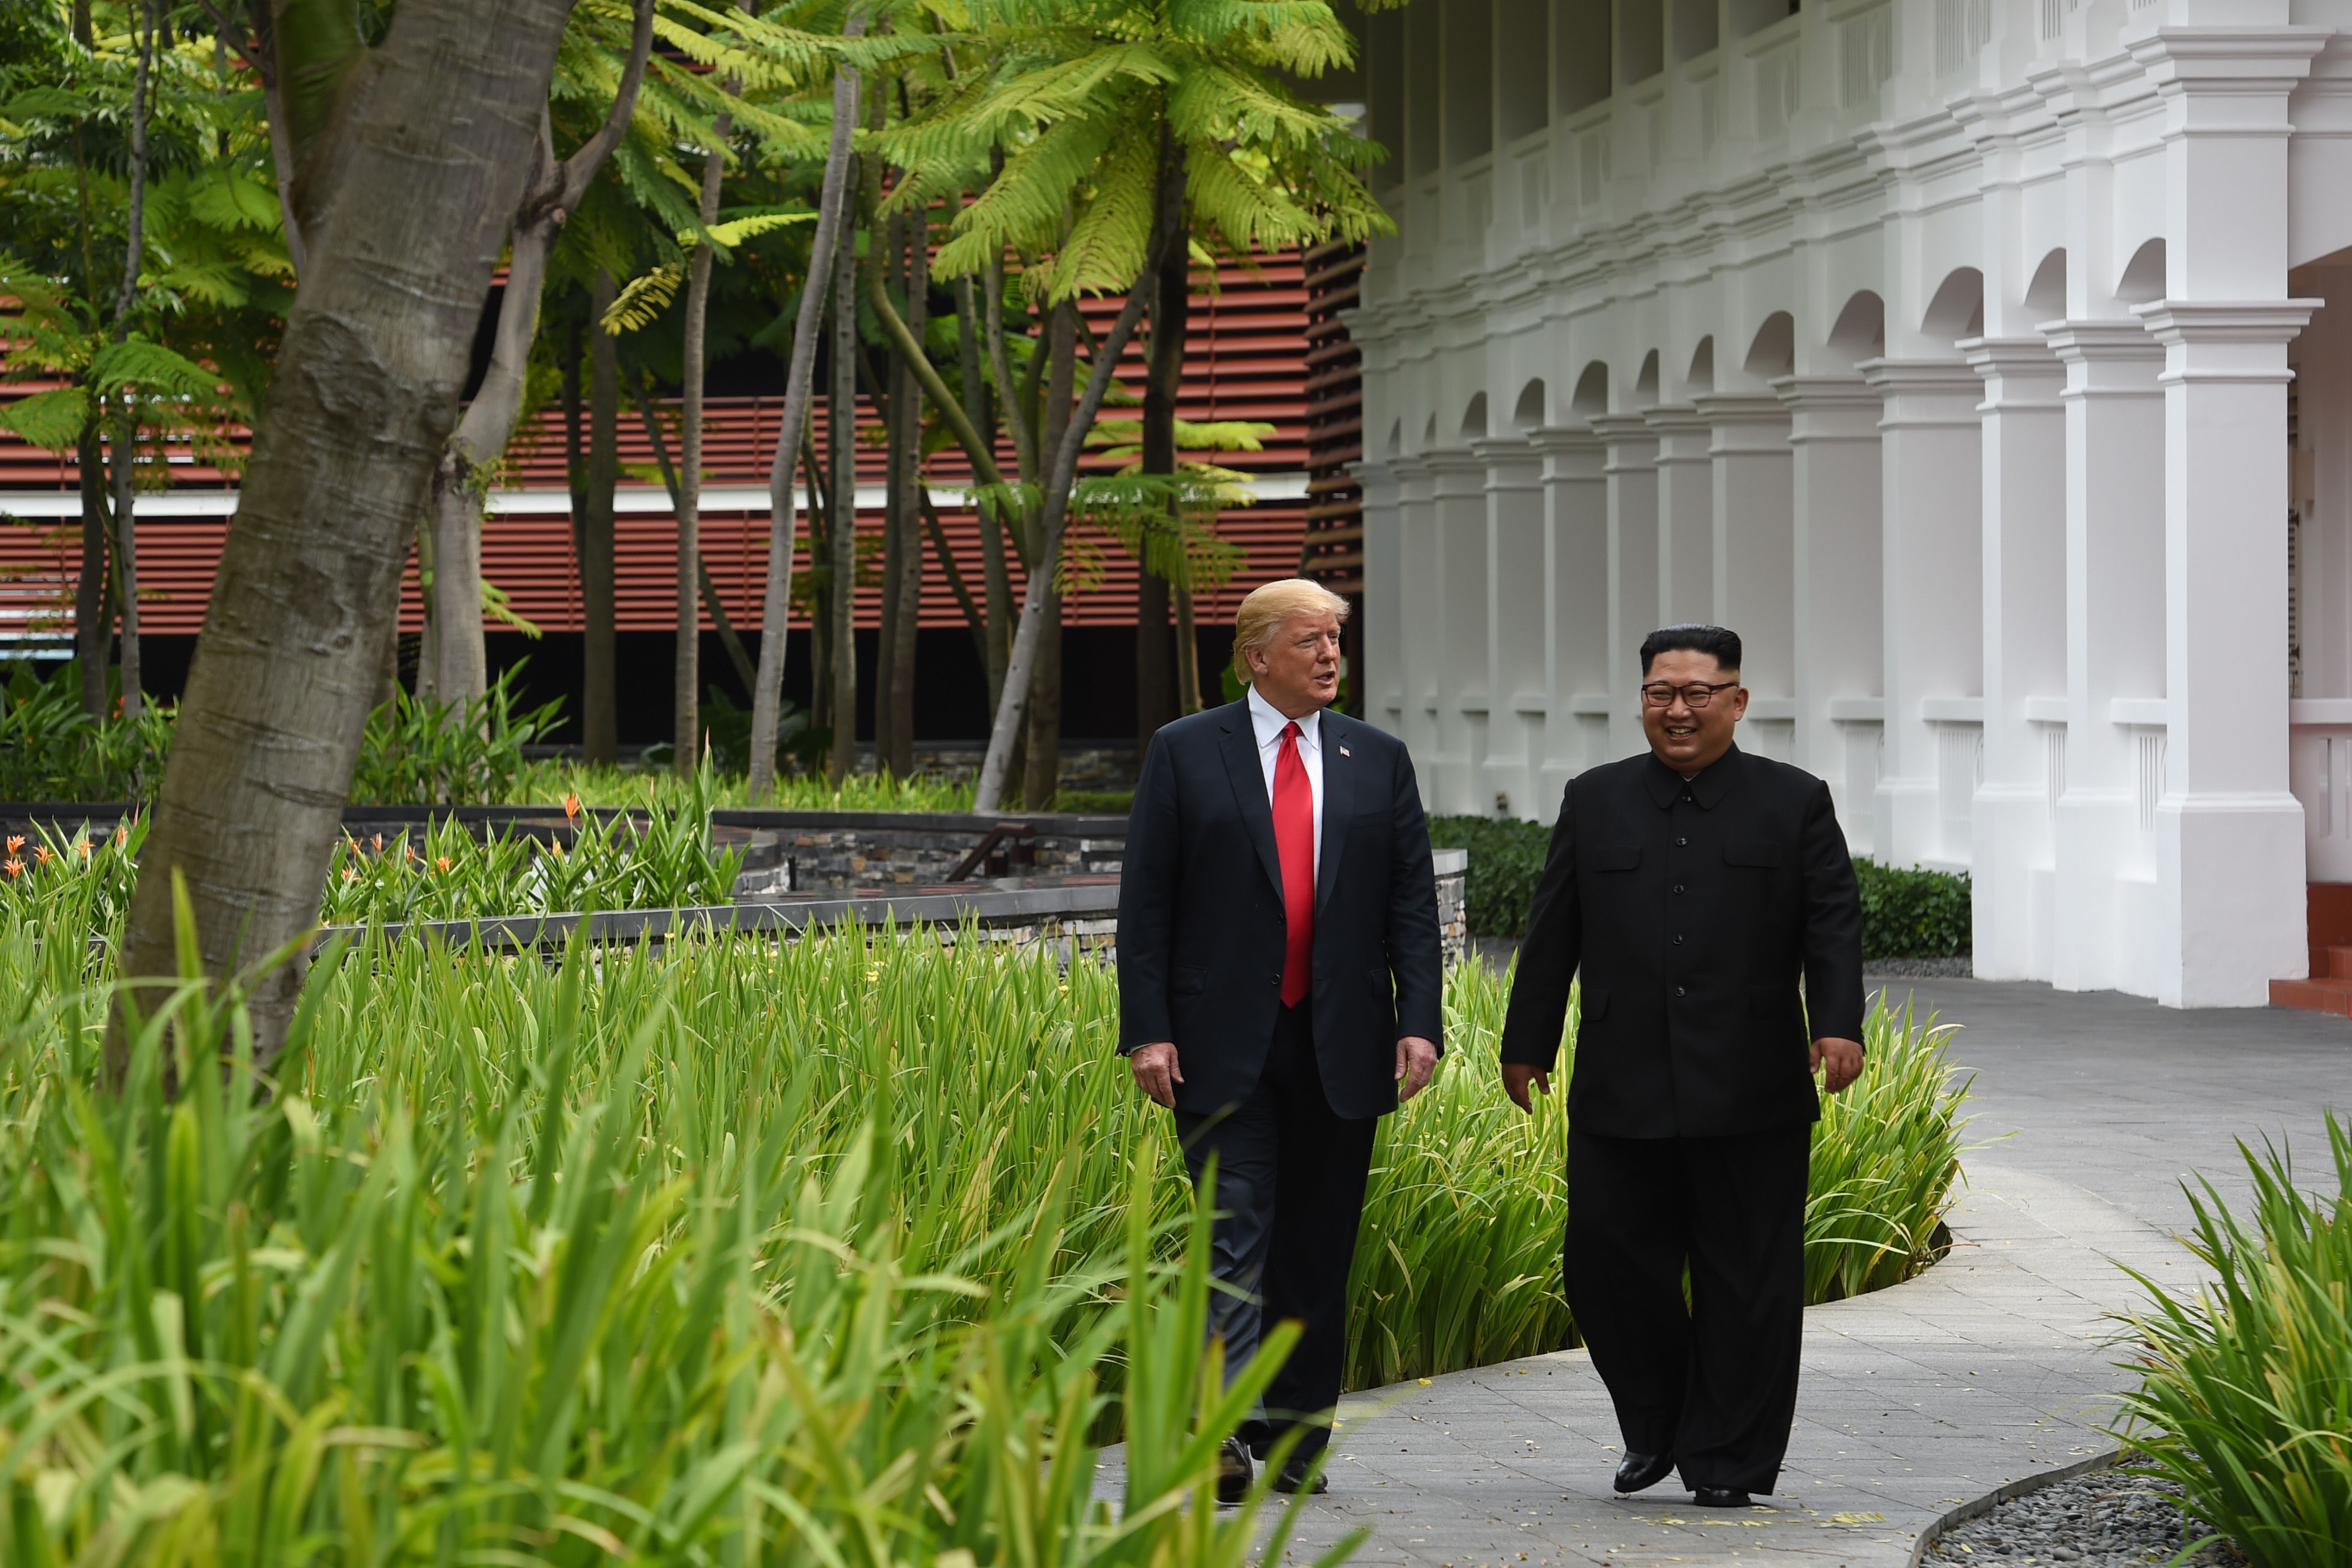 Trump and Kim stroll side by side through the resort